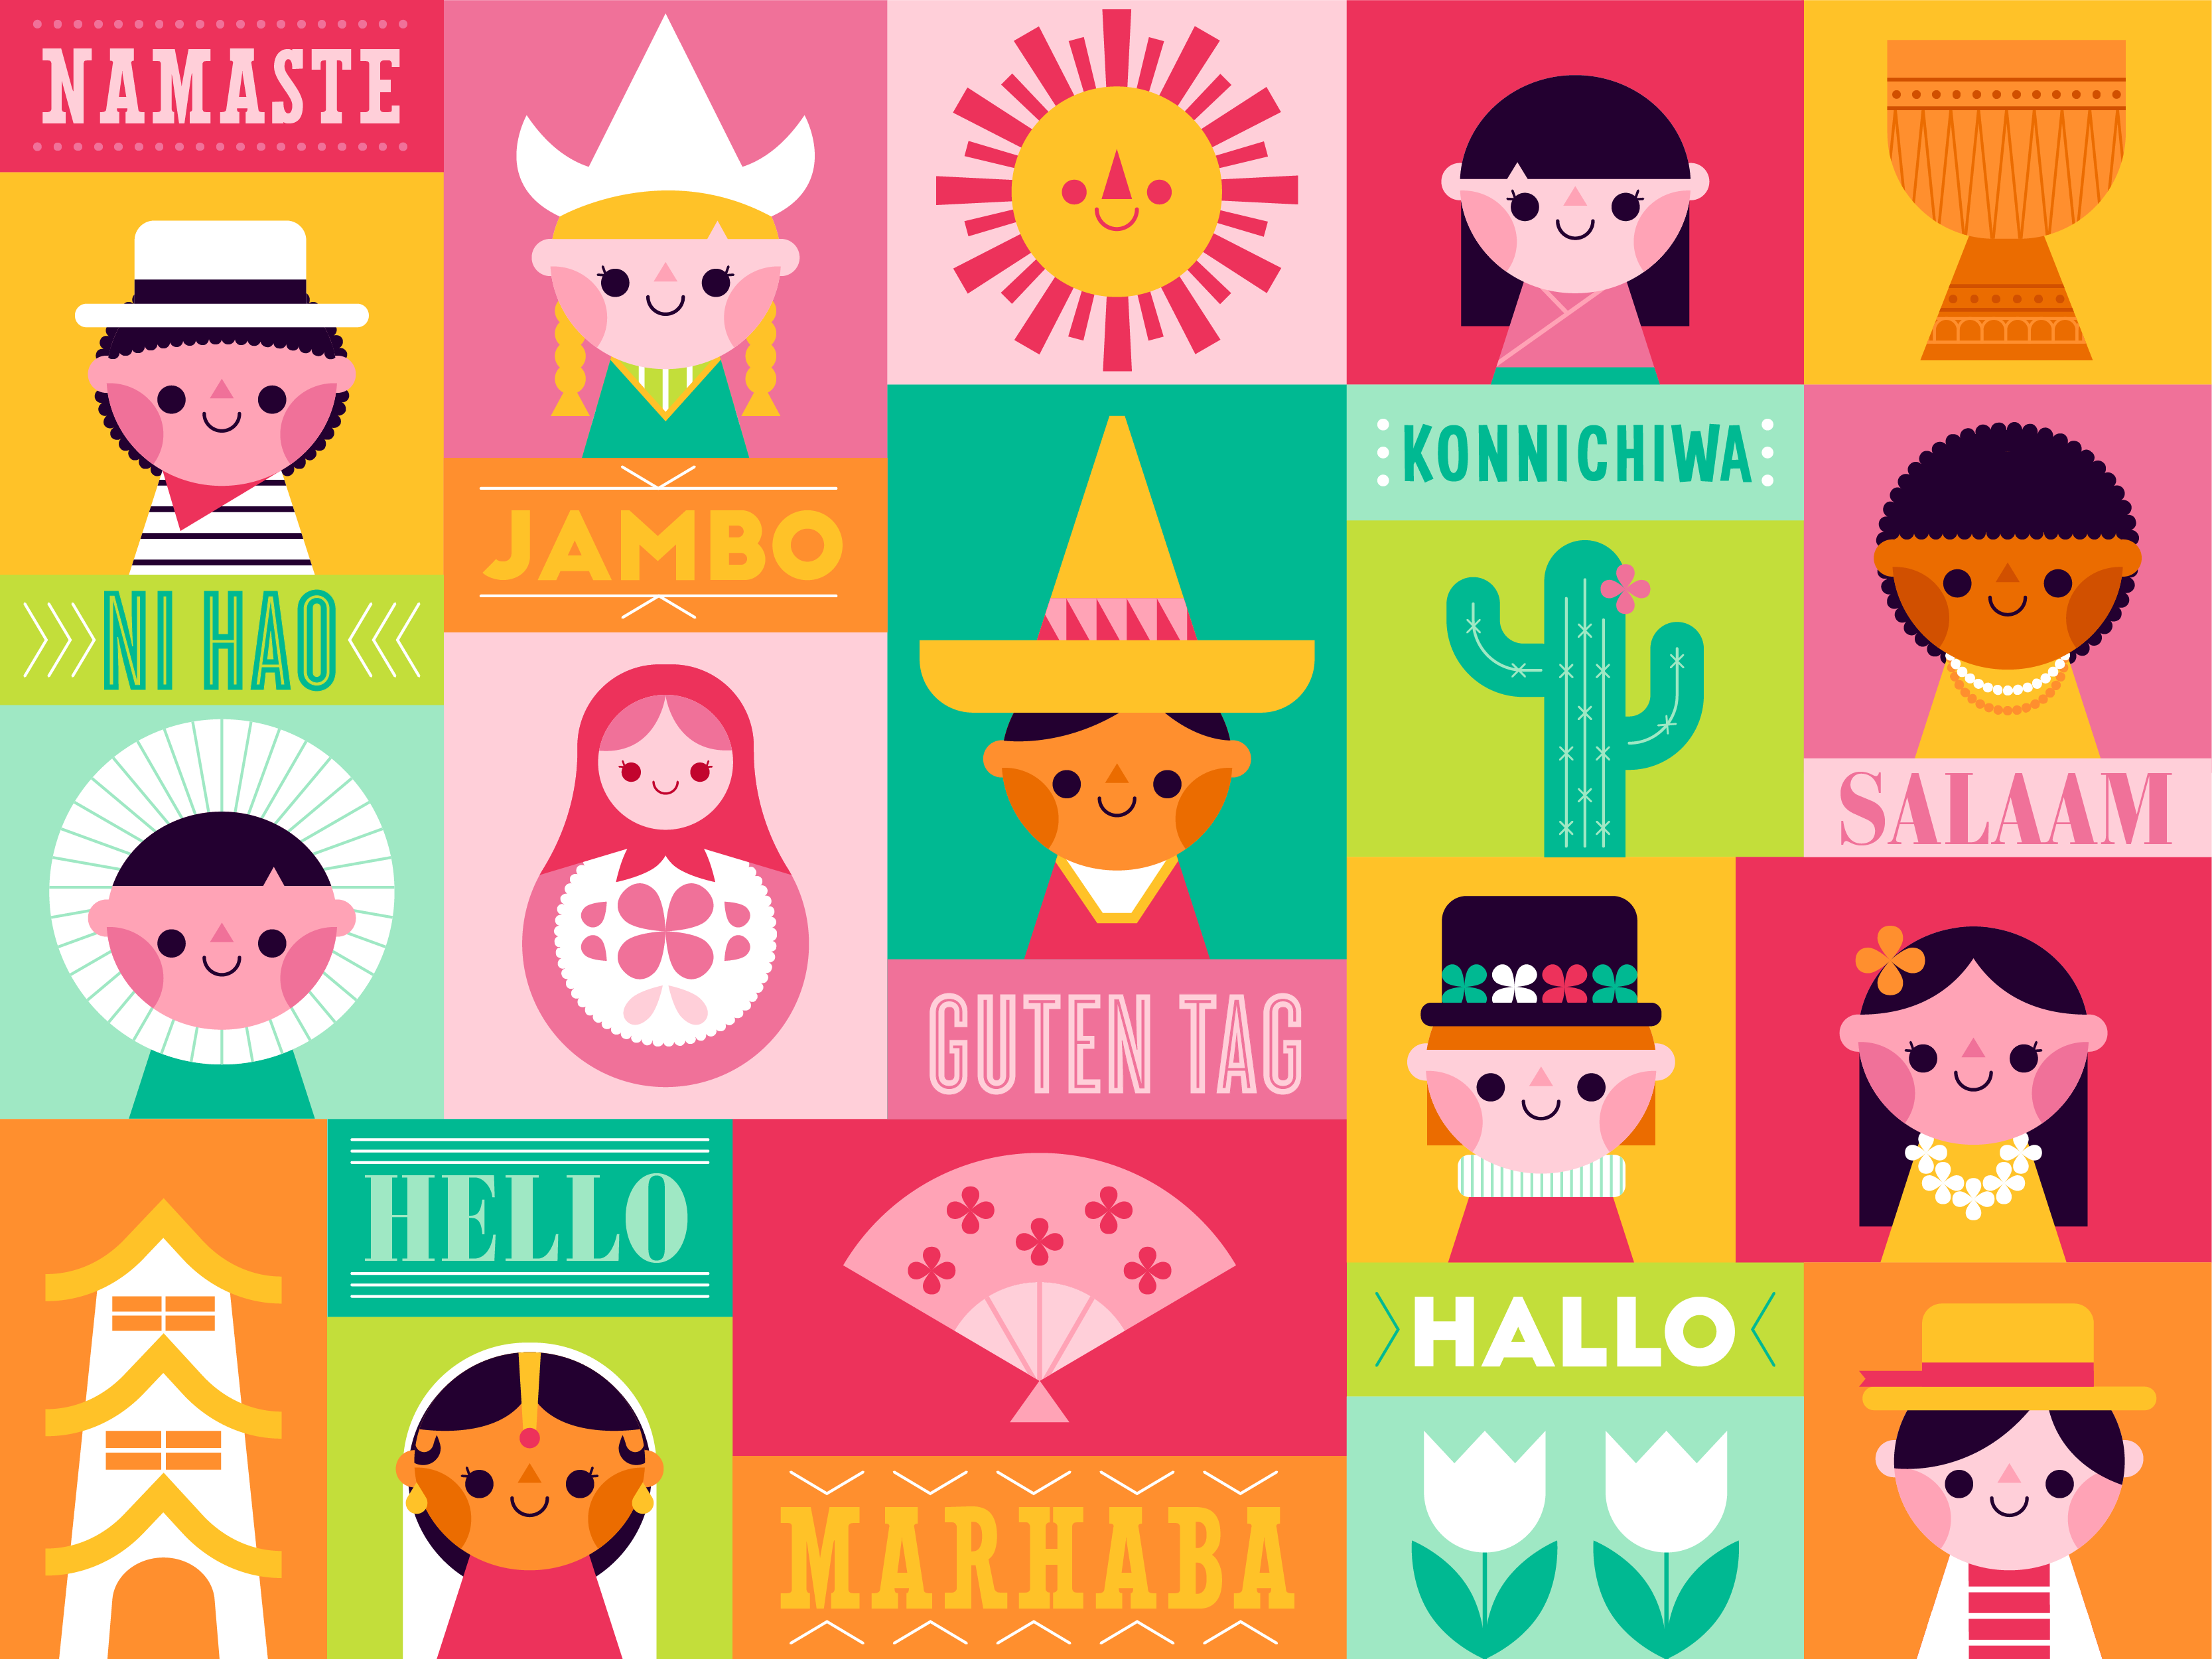 smallworld_dribbble-01.png.